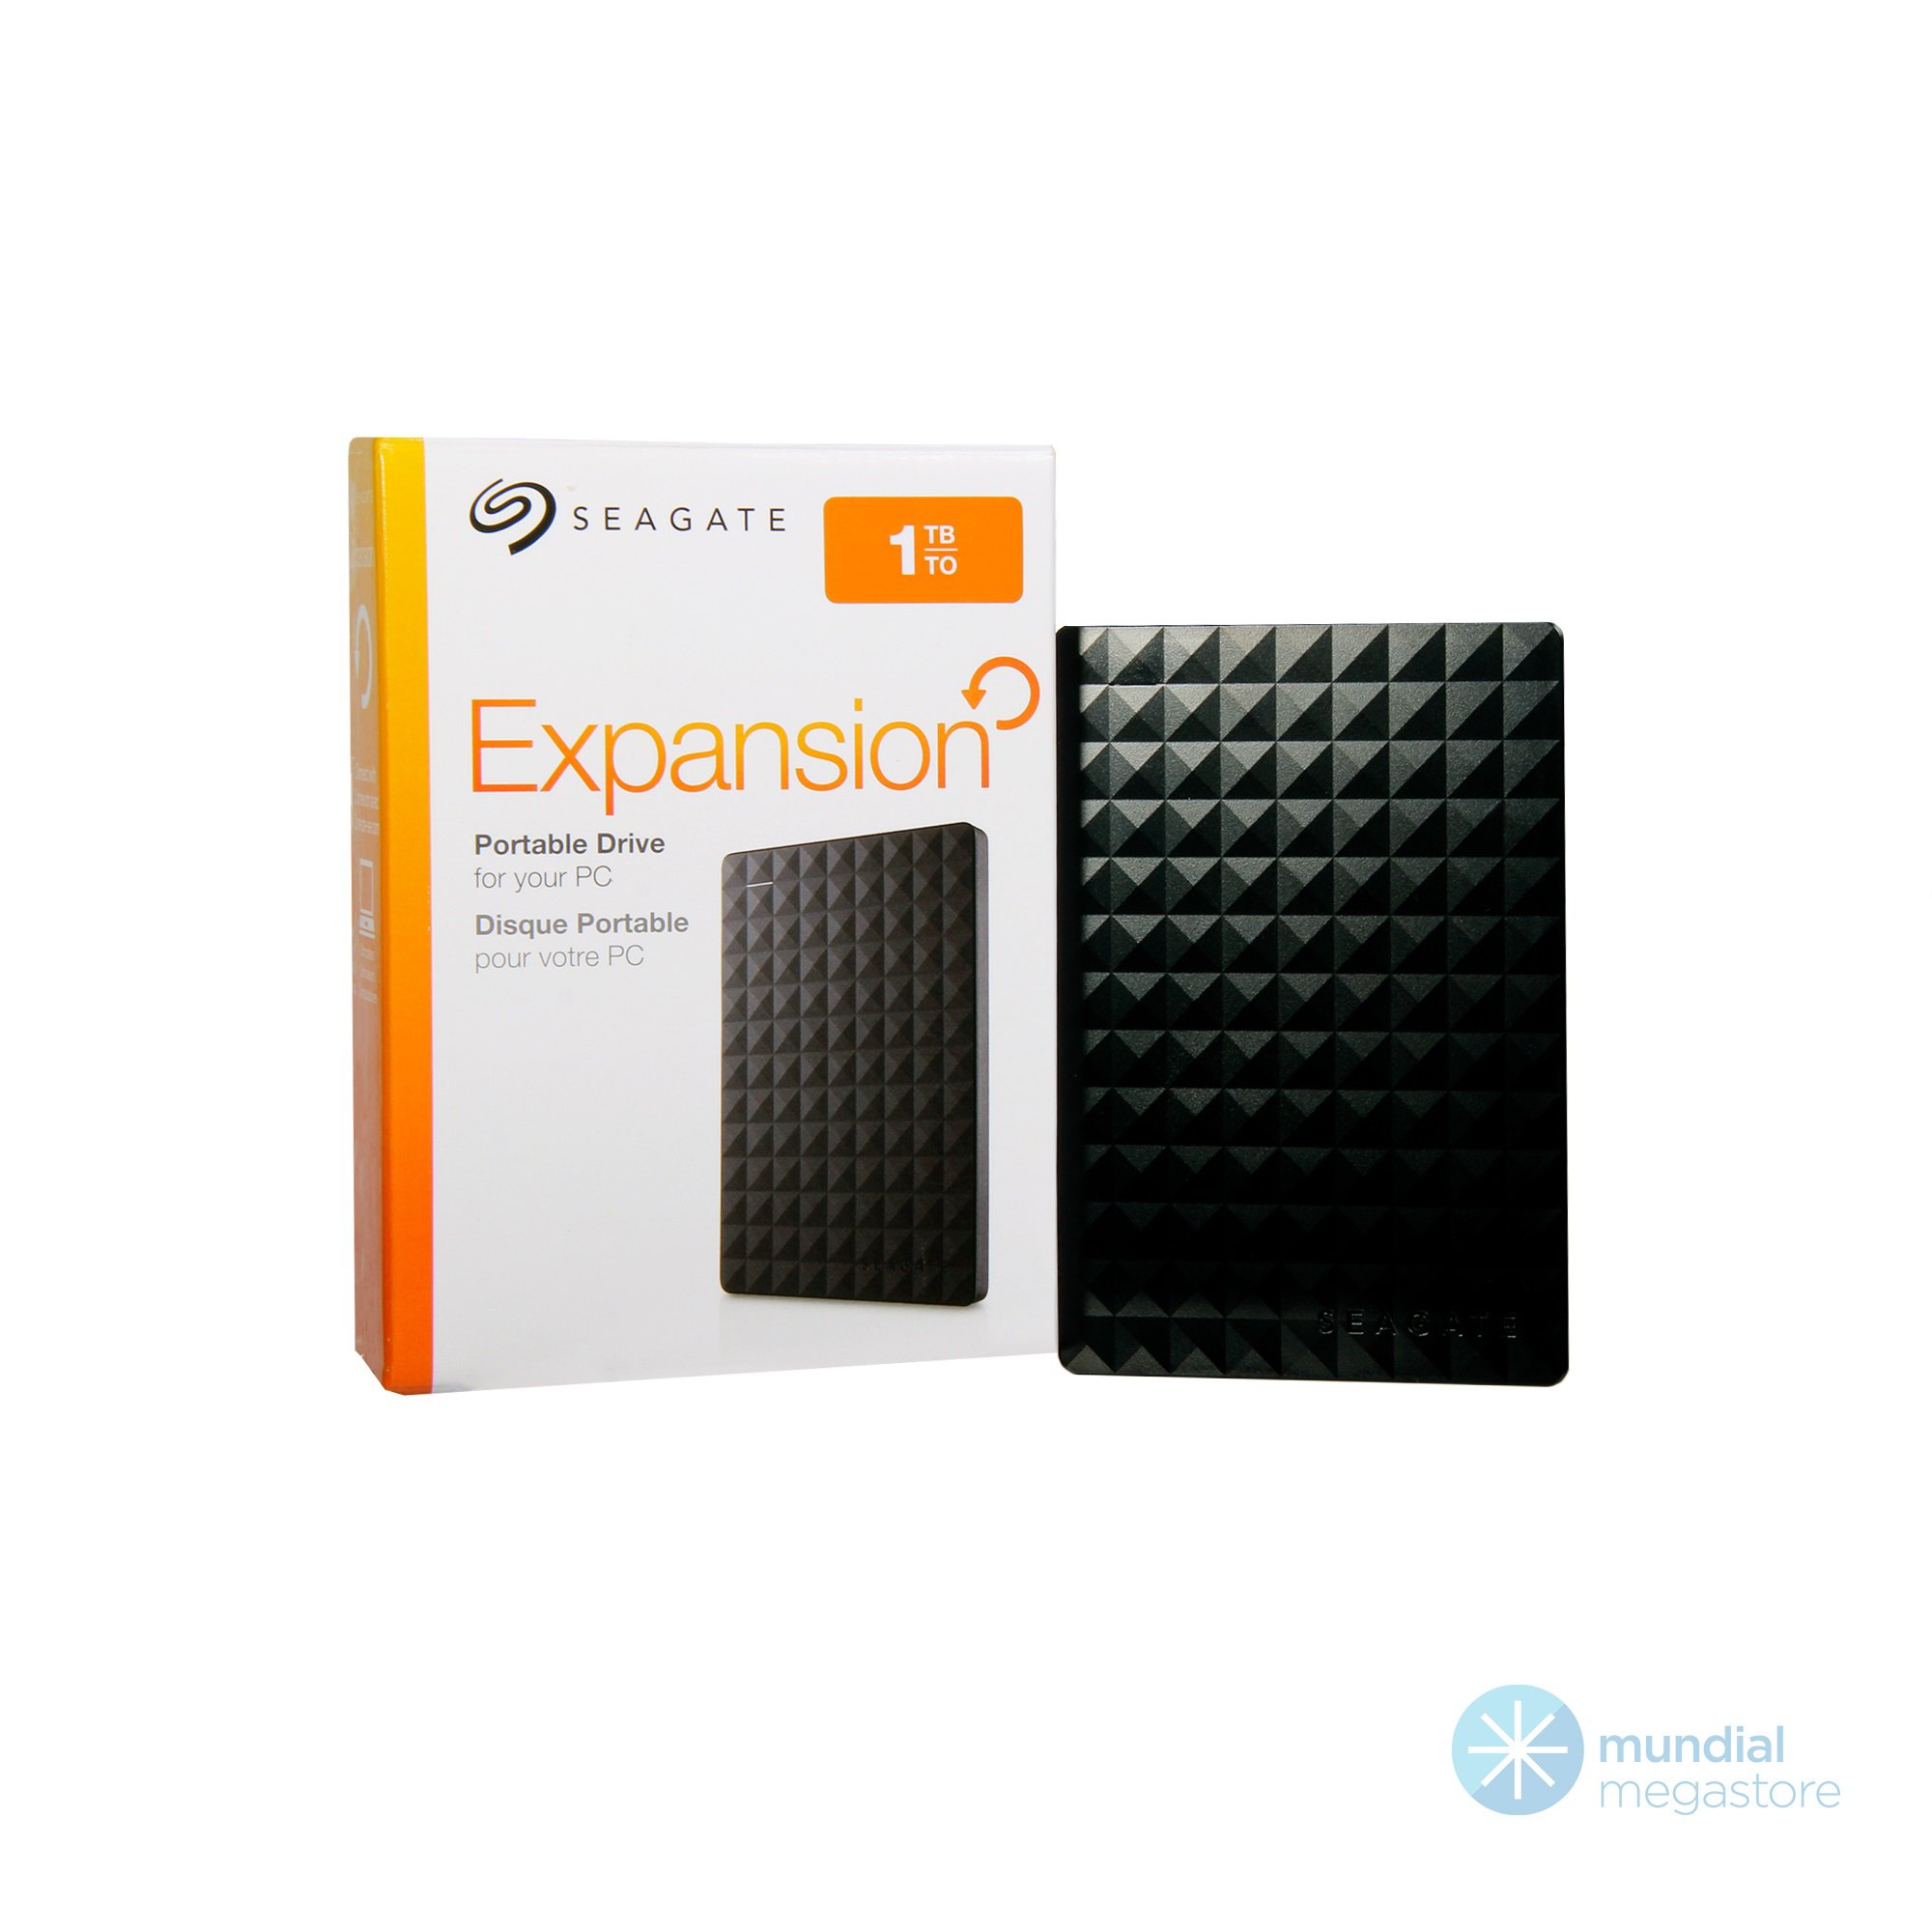 hd externo usb 25 10tb seagate expansion 30 37148 2000 195843